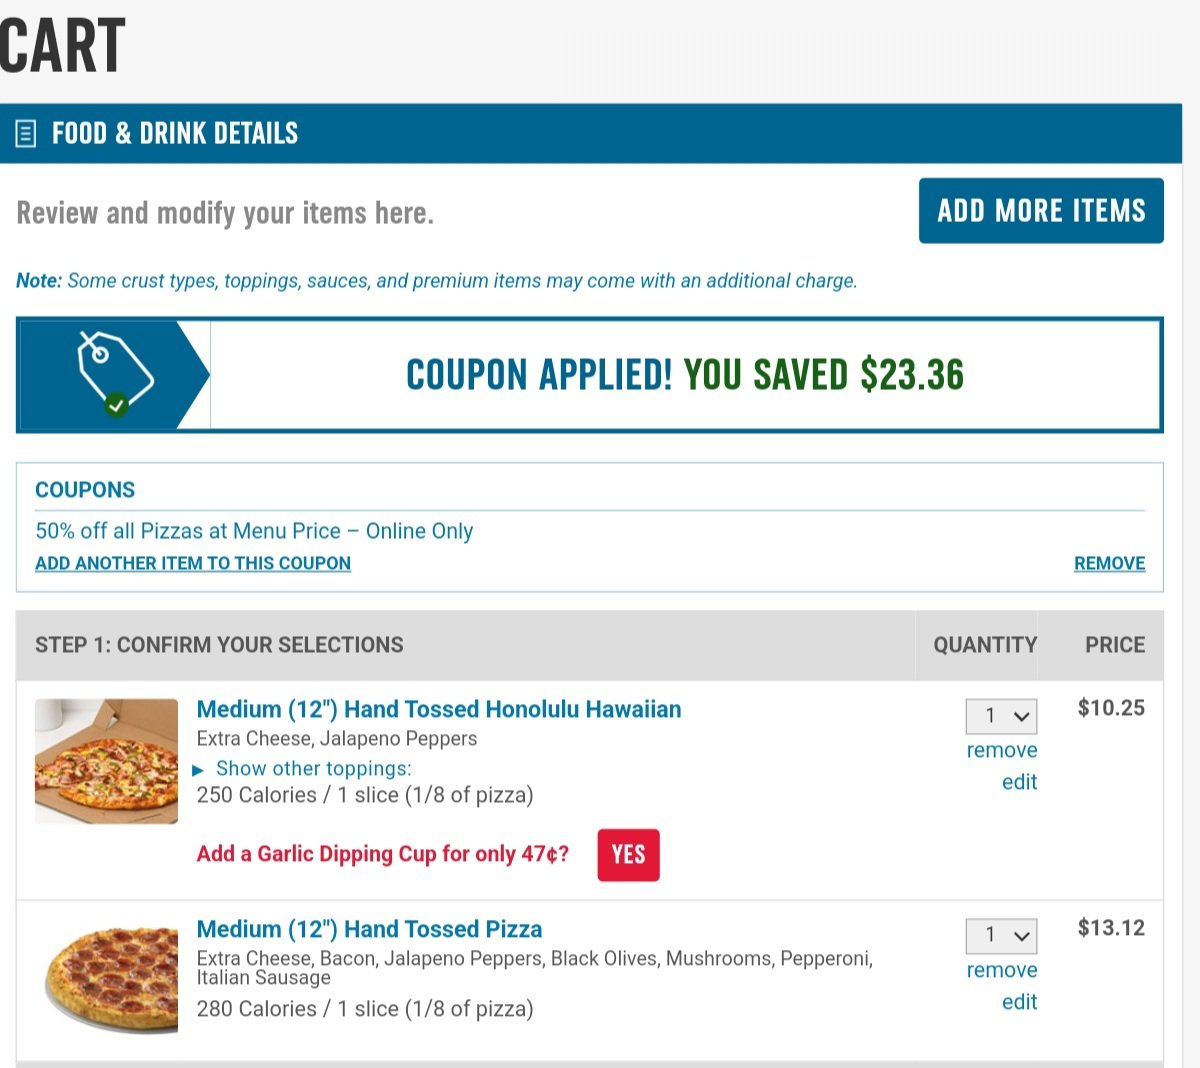 My diet is ruined, so yours is too. Got it in an email, not even from Domino's. Pure cruelty.
dominos.com/en/restaurants…